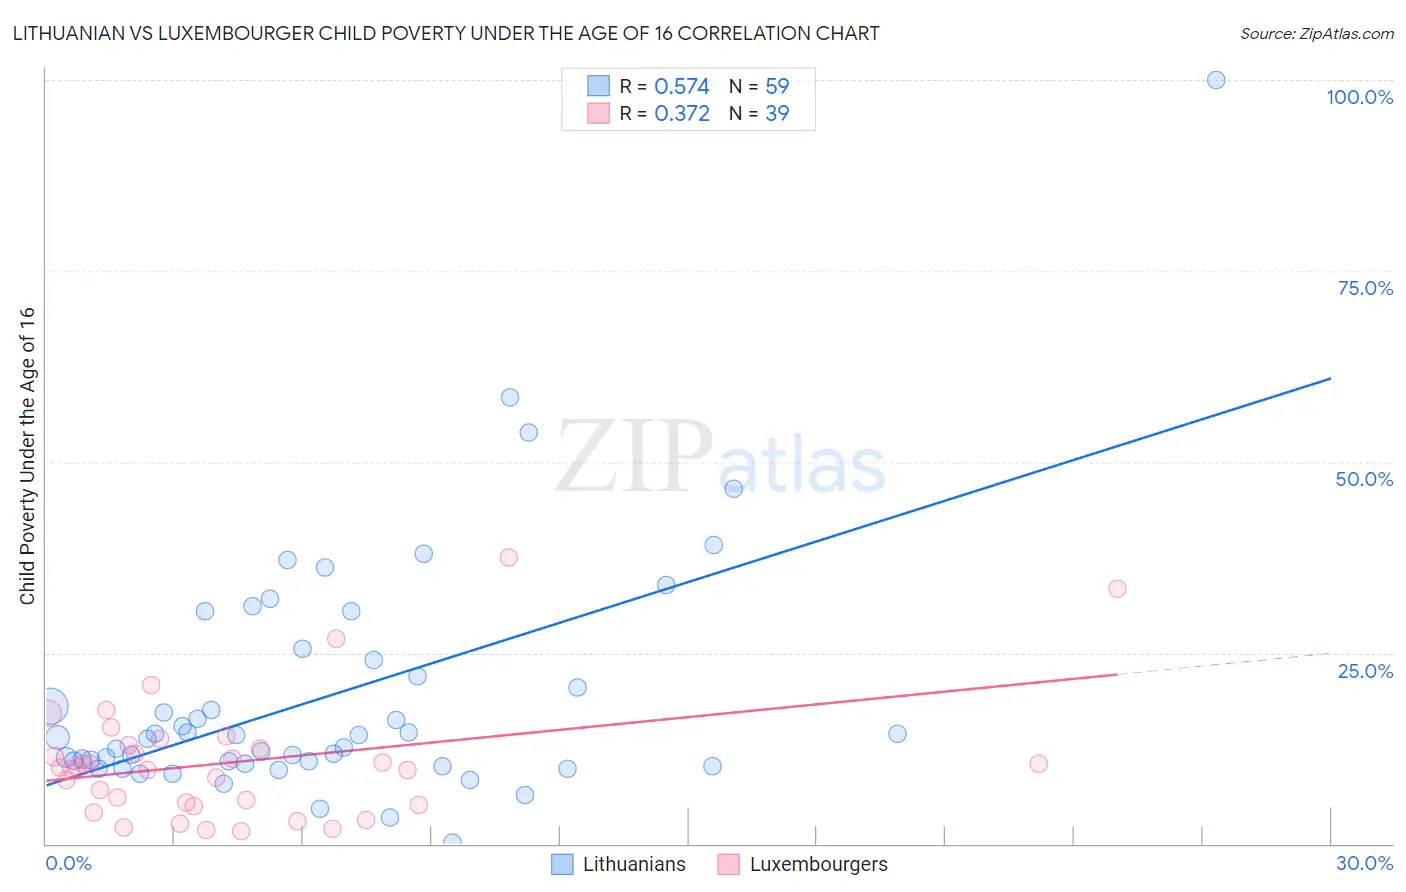 Lithuanian vs Luxembourger Child Poverty Under the Age of 16